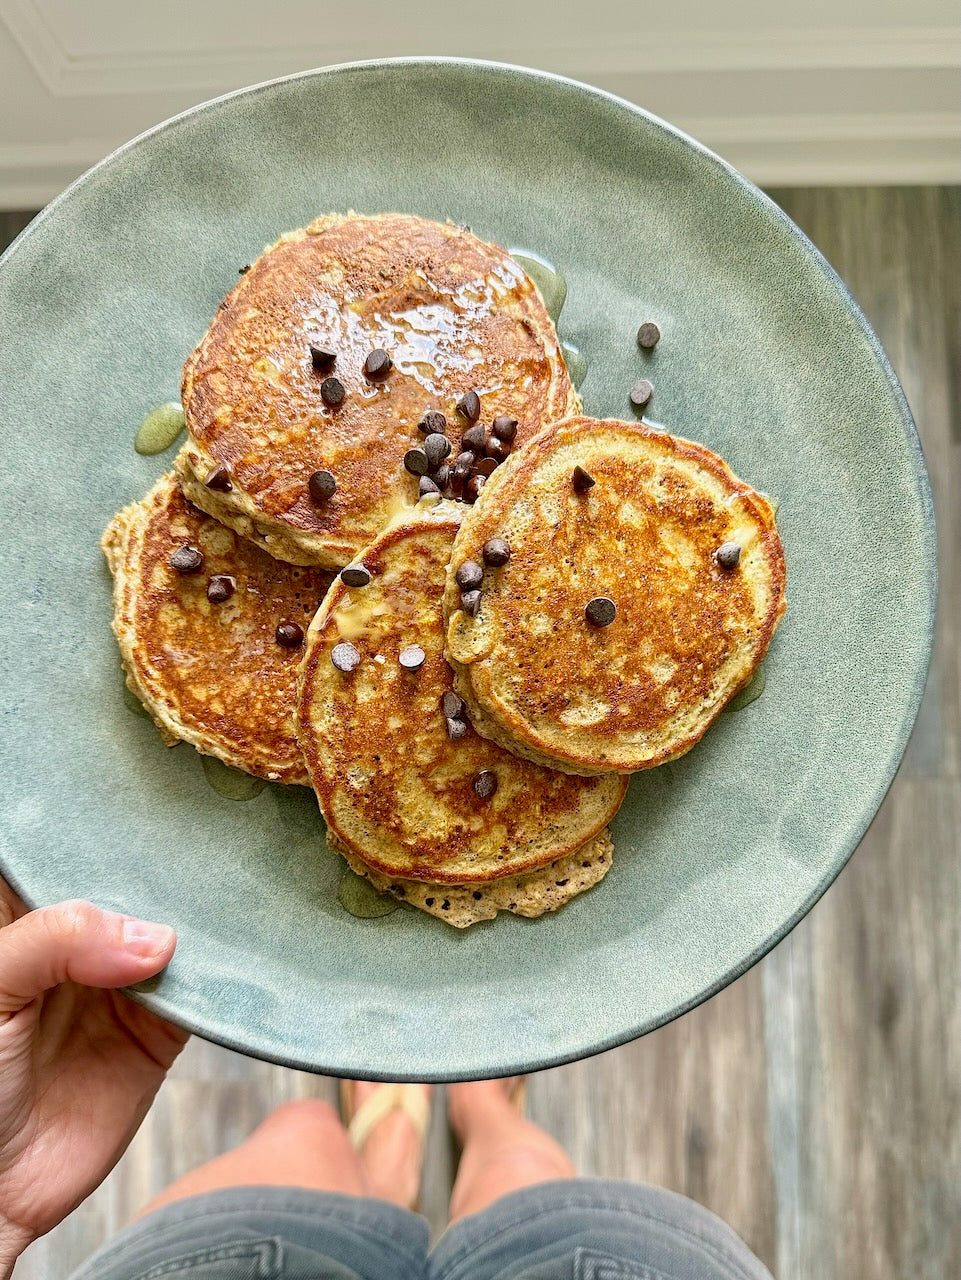 Fluffy and Delicious Chocolate Chip Protein Pancakes Recipe – Ready in Minutes